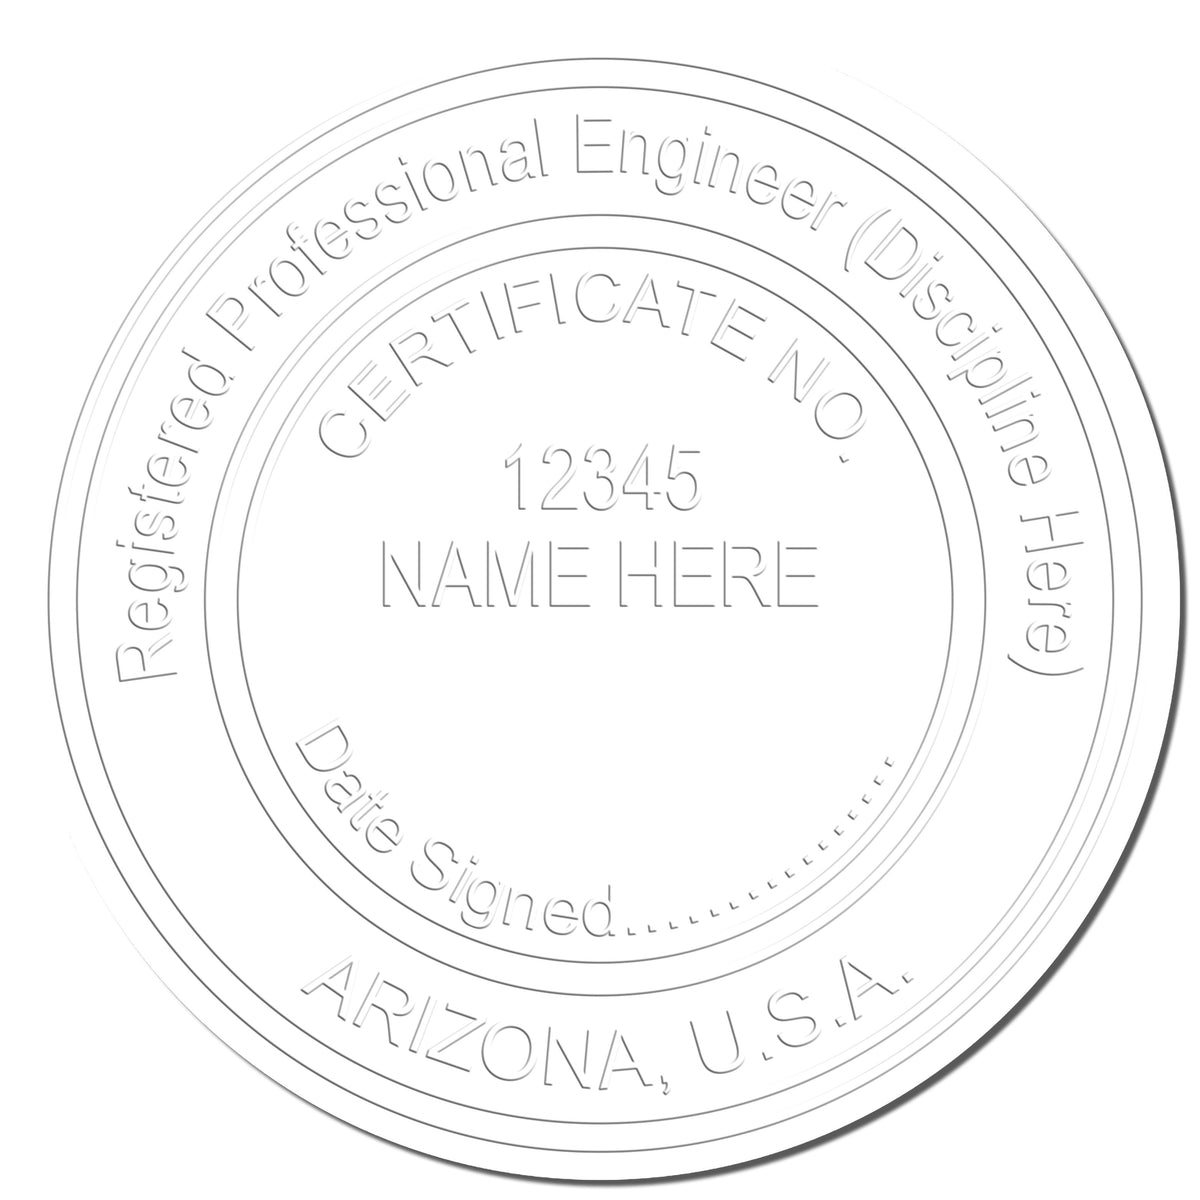 This paper is stamped with a sample imprint of the Gift Arizona Engineer Seal, signifying its quality and reliability.